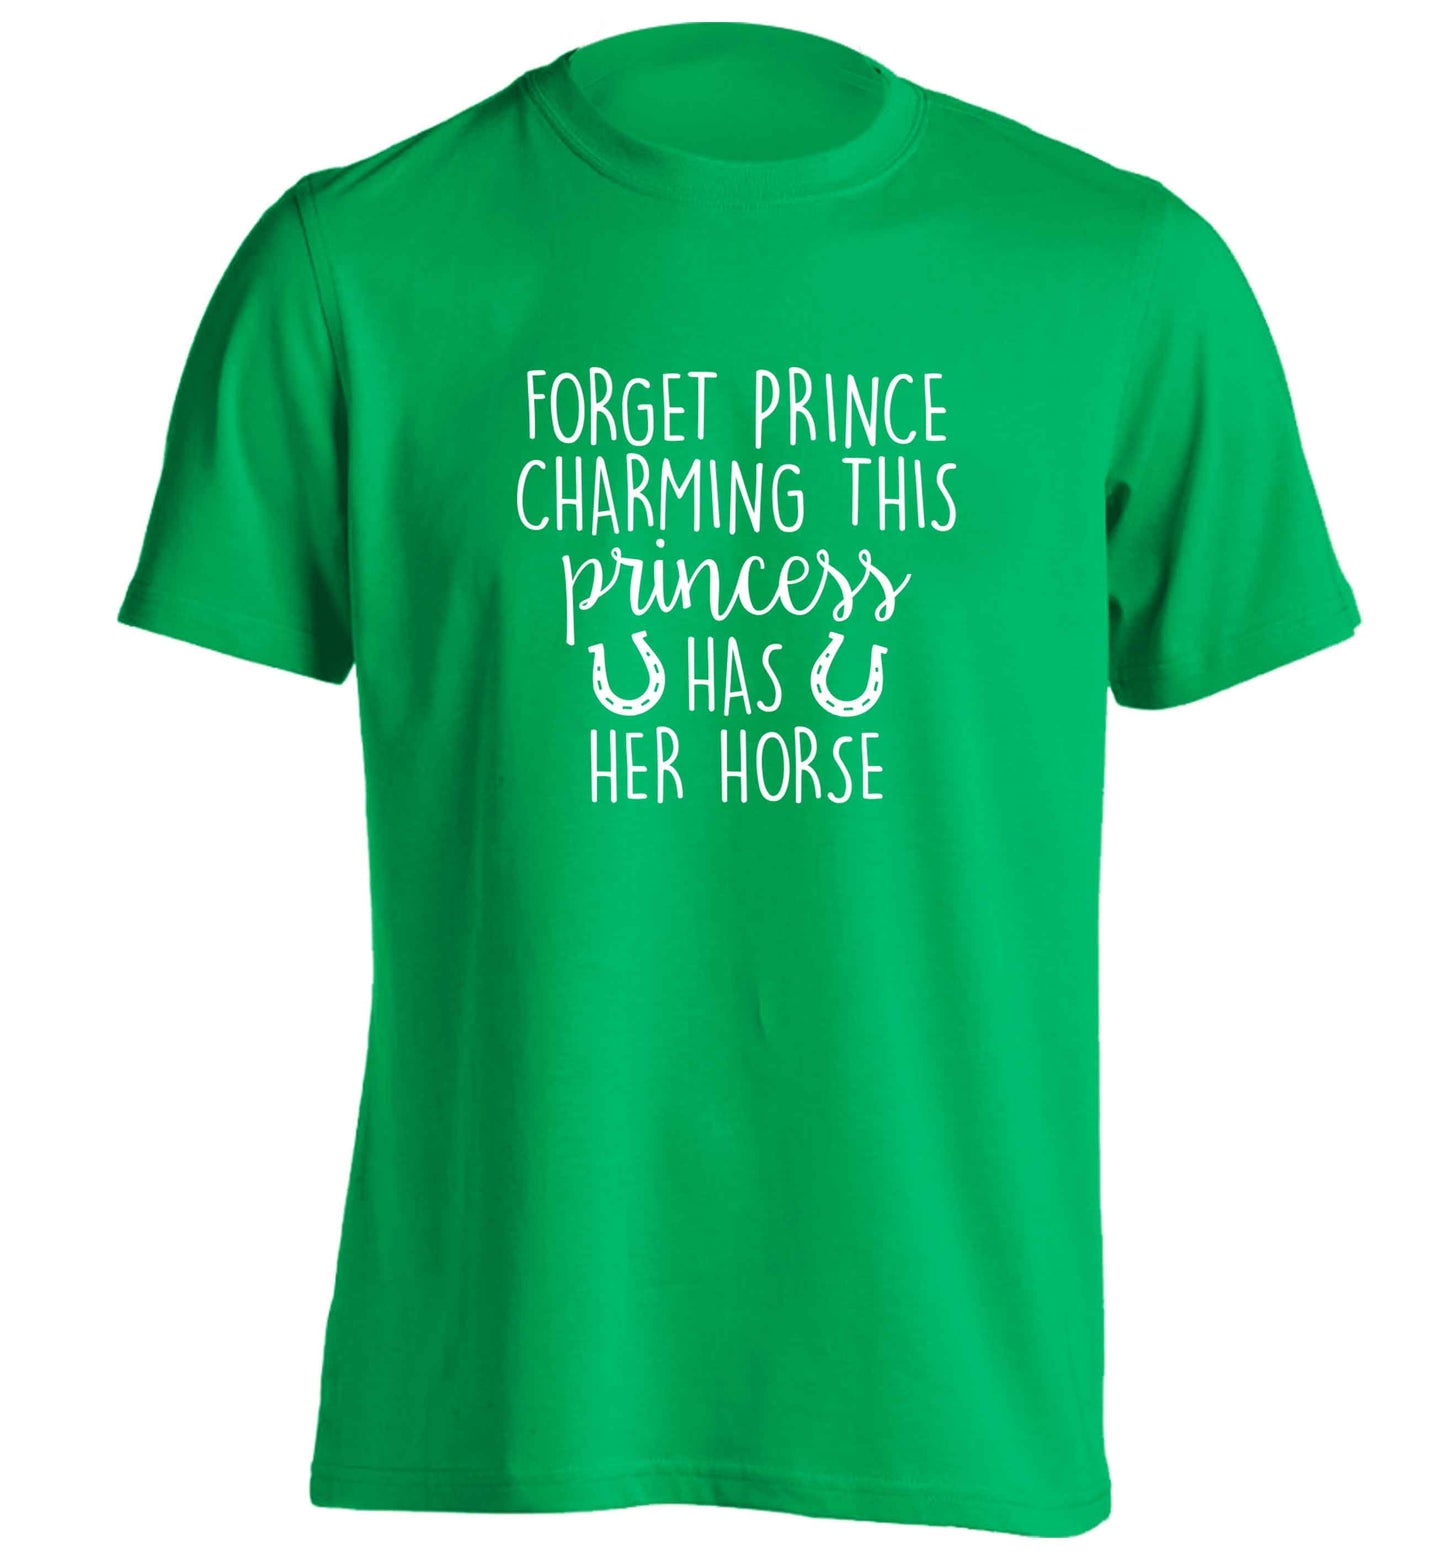 Forget prince charming this princess has her horse adults unisex green Tshirt 2XL